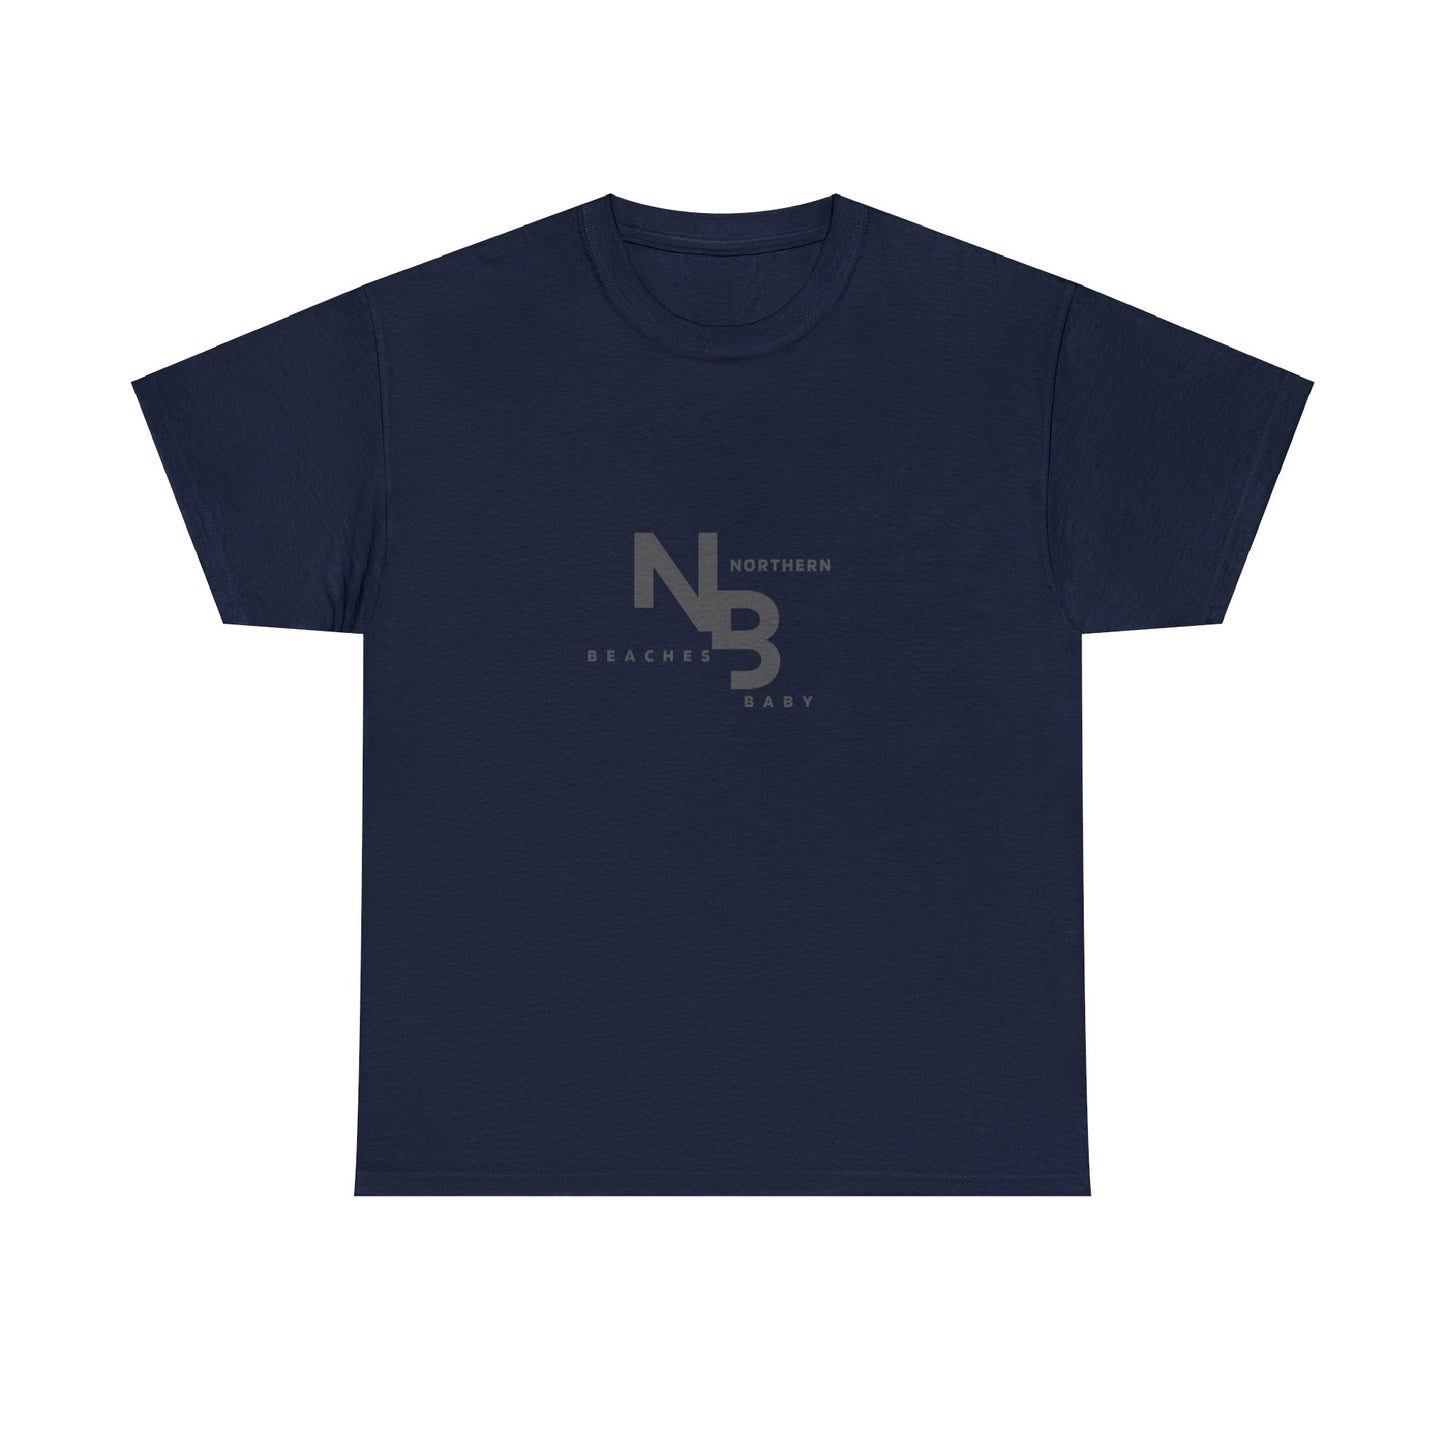 Cotton Tee with Northern Beaches baby logo